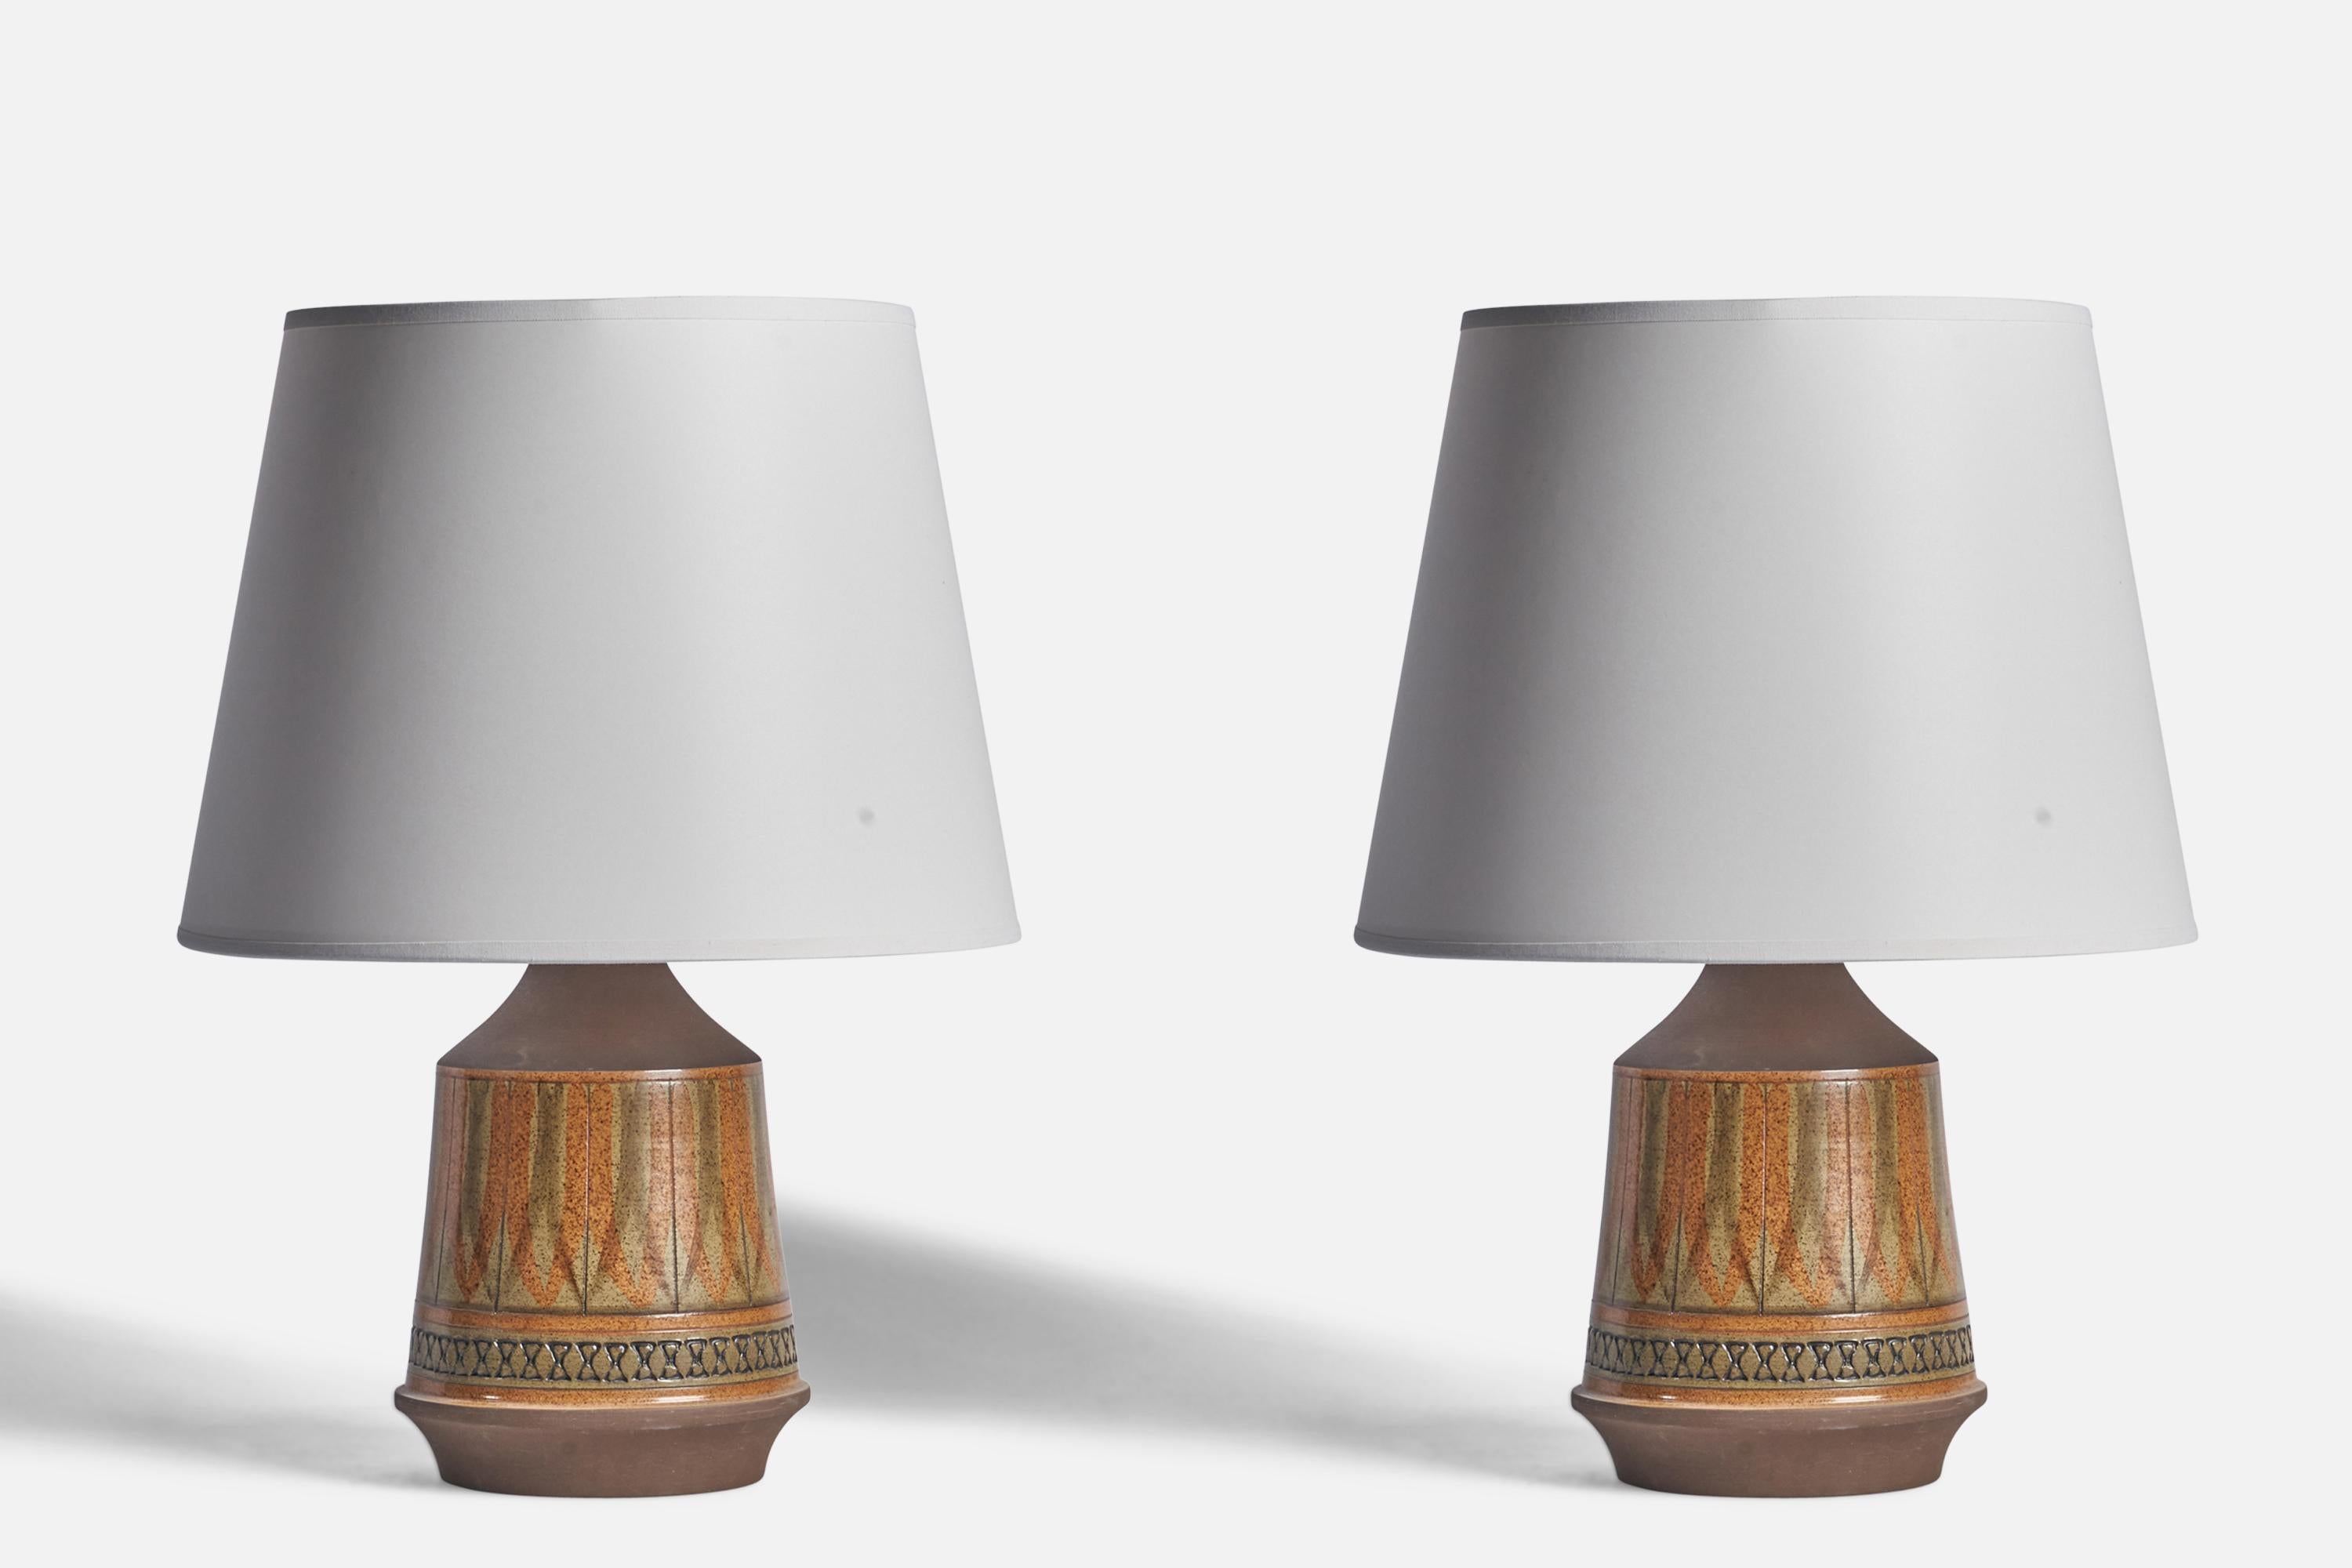 A pair of brown and beige-glazed table lamps designed by Ulla Winbladh and produced by Alingsås Keramik, Sweden, c. 1960s.

Dimensions of Lamp (inches): 11.25” H x 6” Diameter
Dimensions of Shade (inches): 9” Top Diameter x 12” Bottom Diameter x 9”